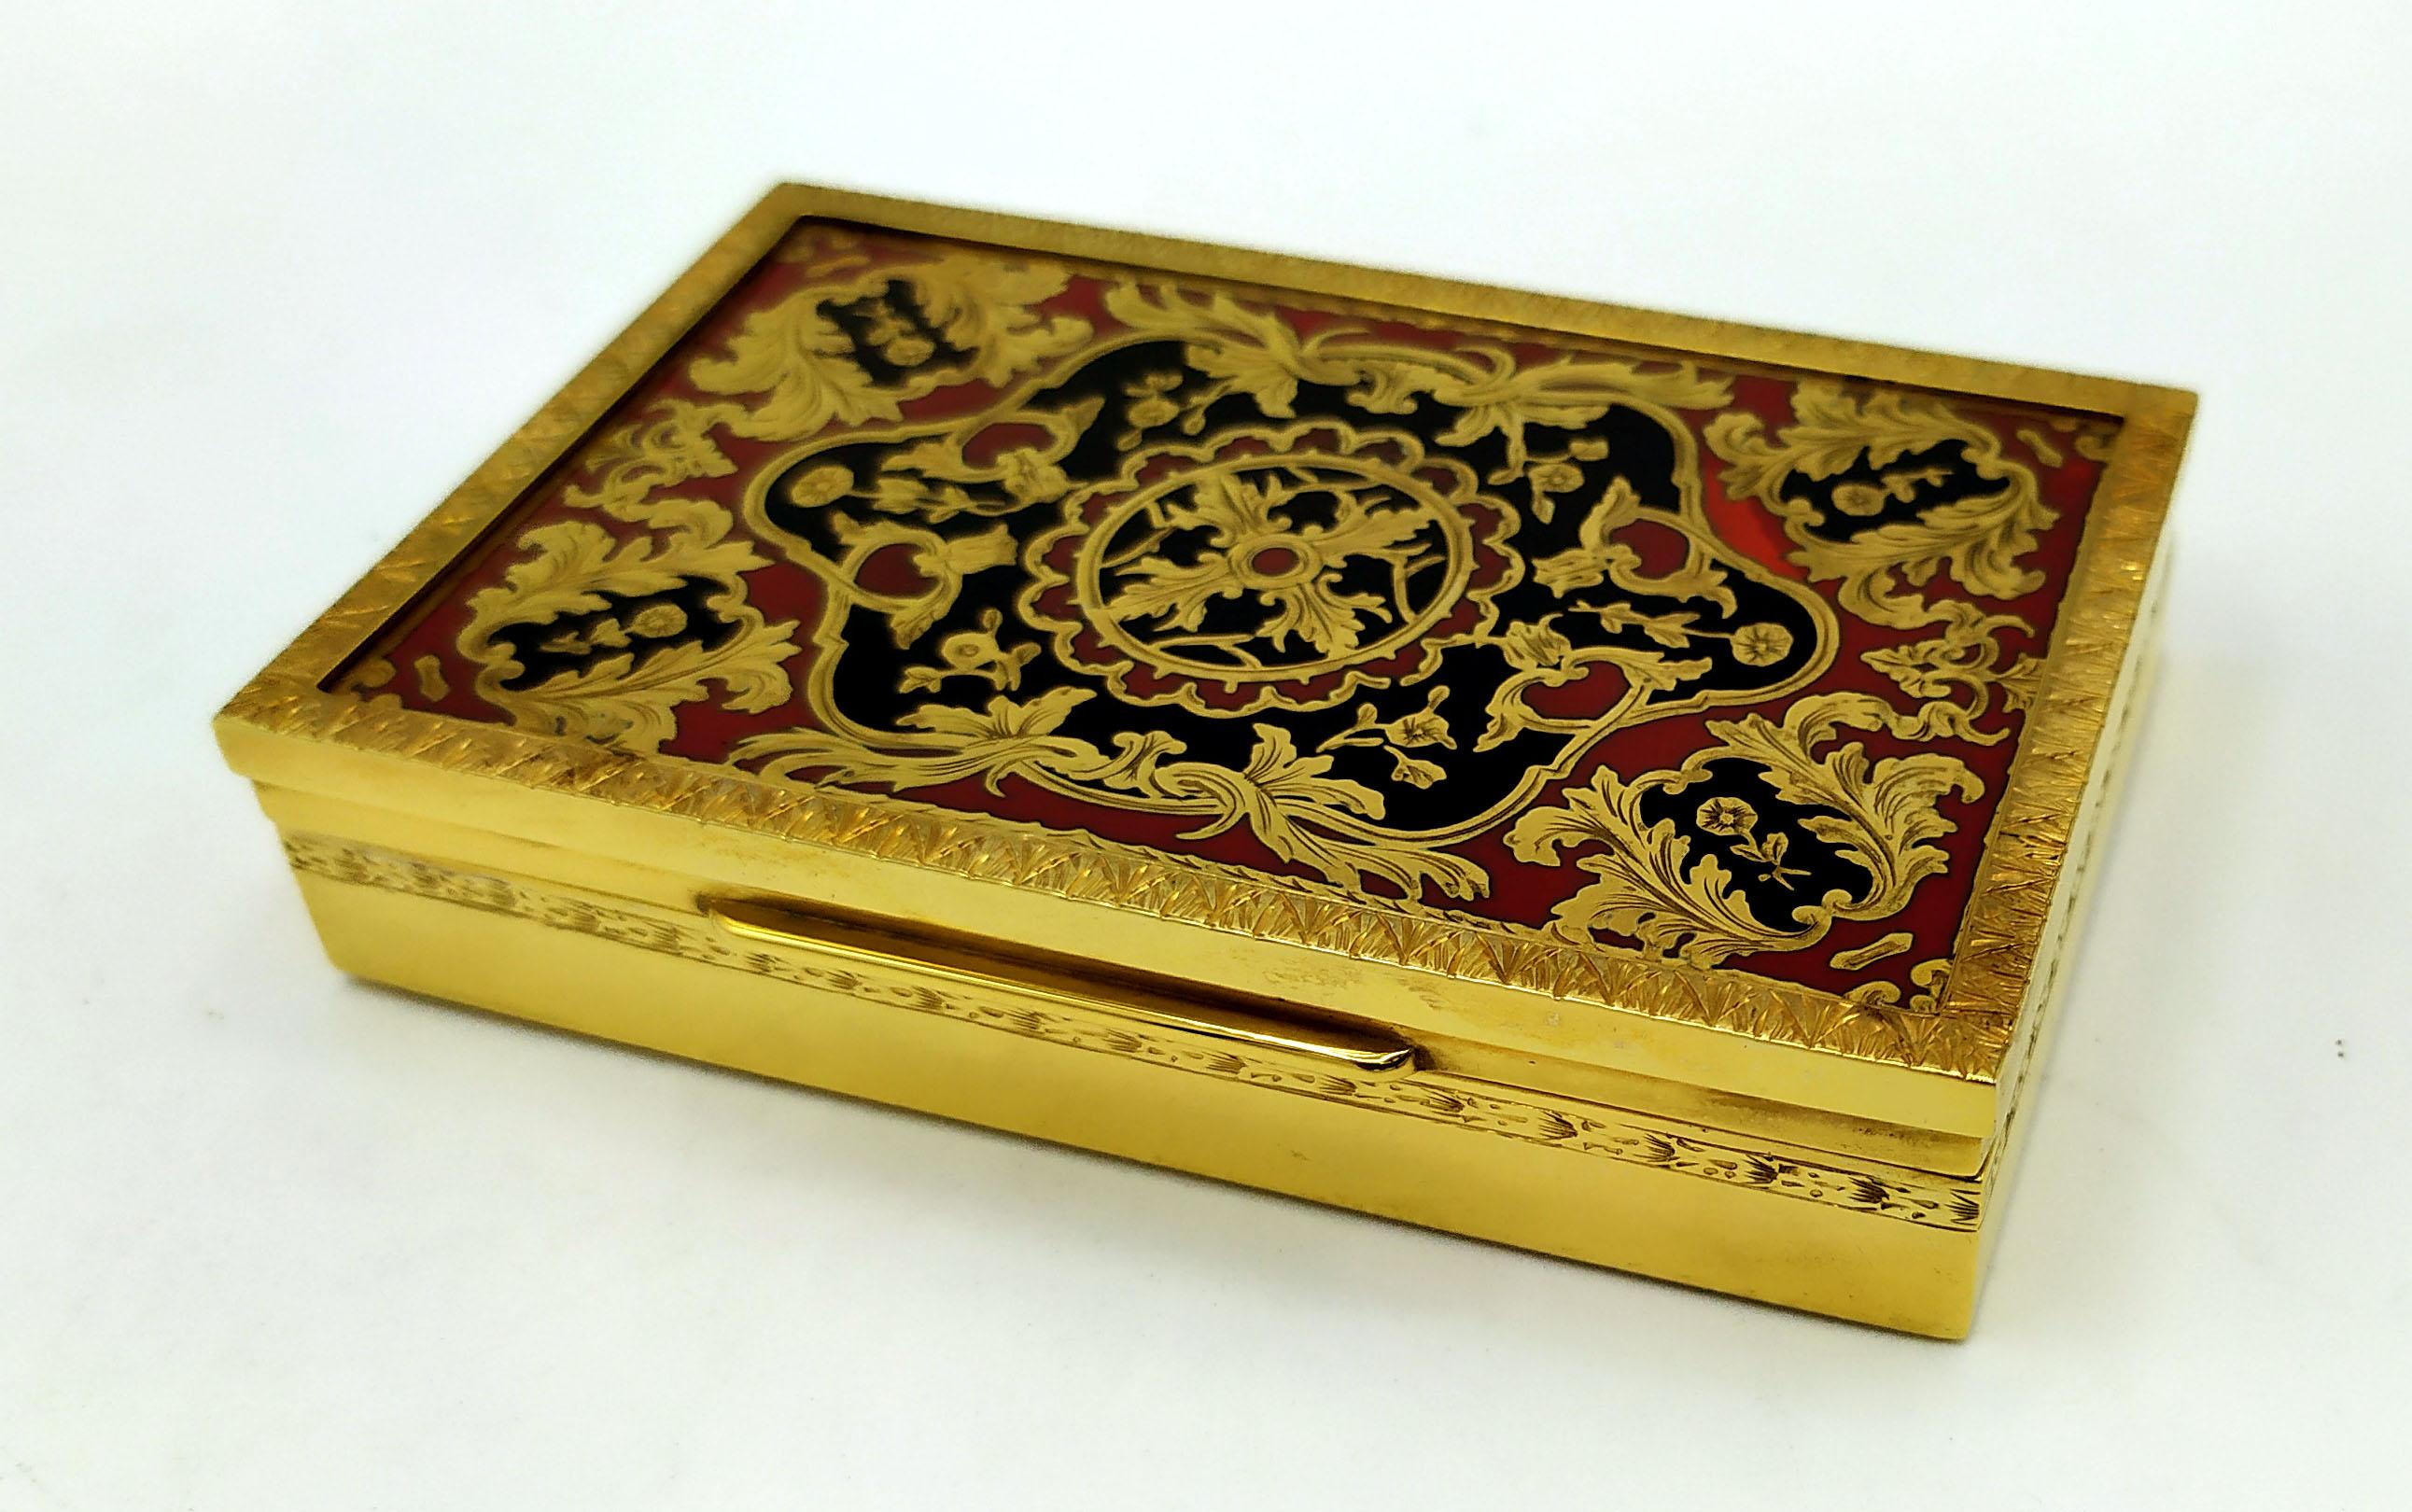 Rectangular table box for cigarettes in sterling silver 925/1000 gold plated with hand-engraved design in Baroque style with two-tone fired enamels. Measure cm. 6.5 x 10.2 x 2. Weight gr. 232. Designed by Franco Salimbeni in 1977 and made in various